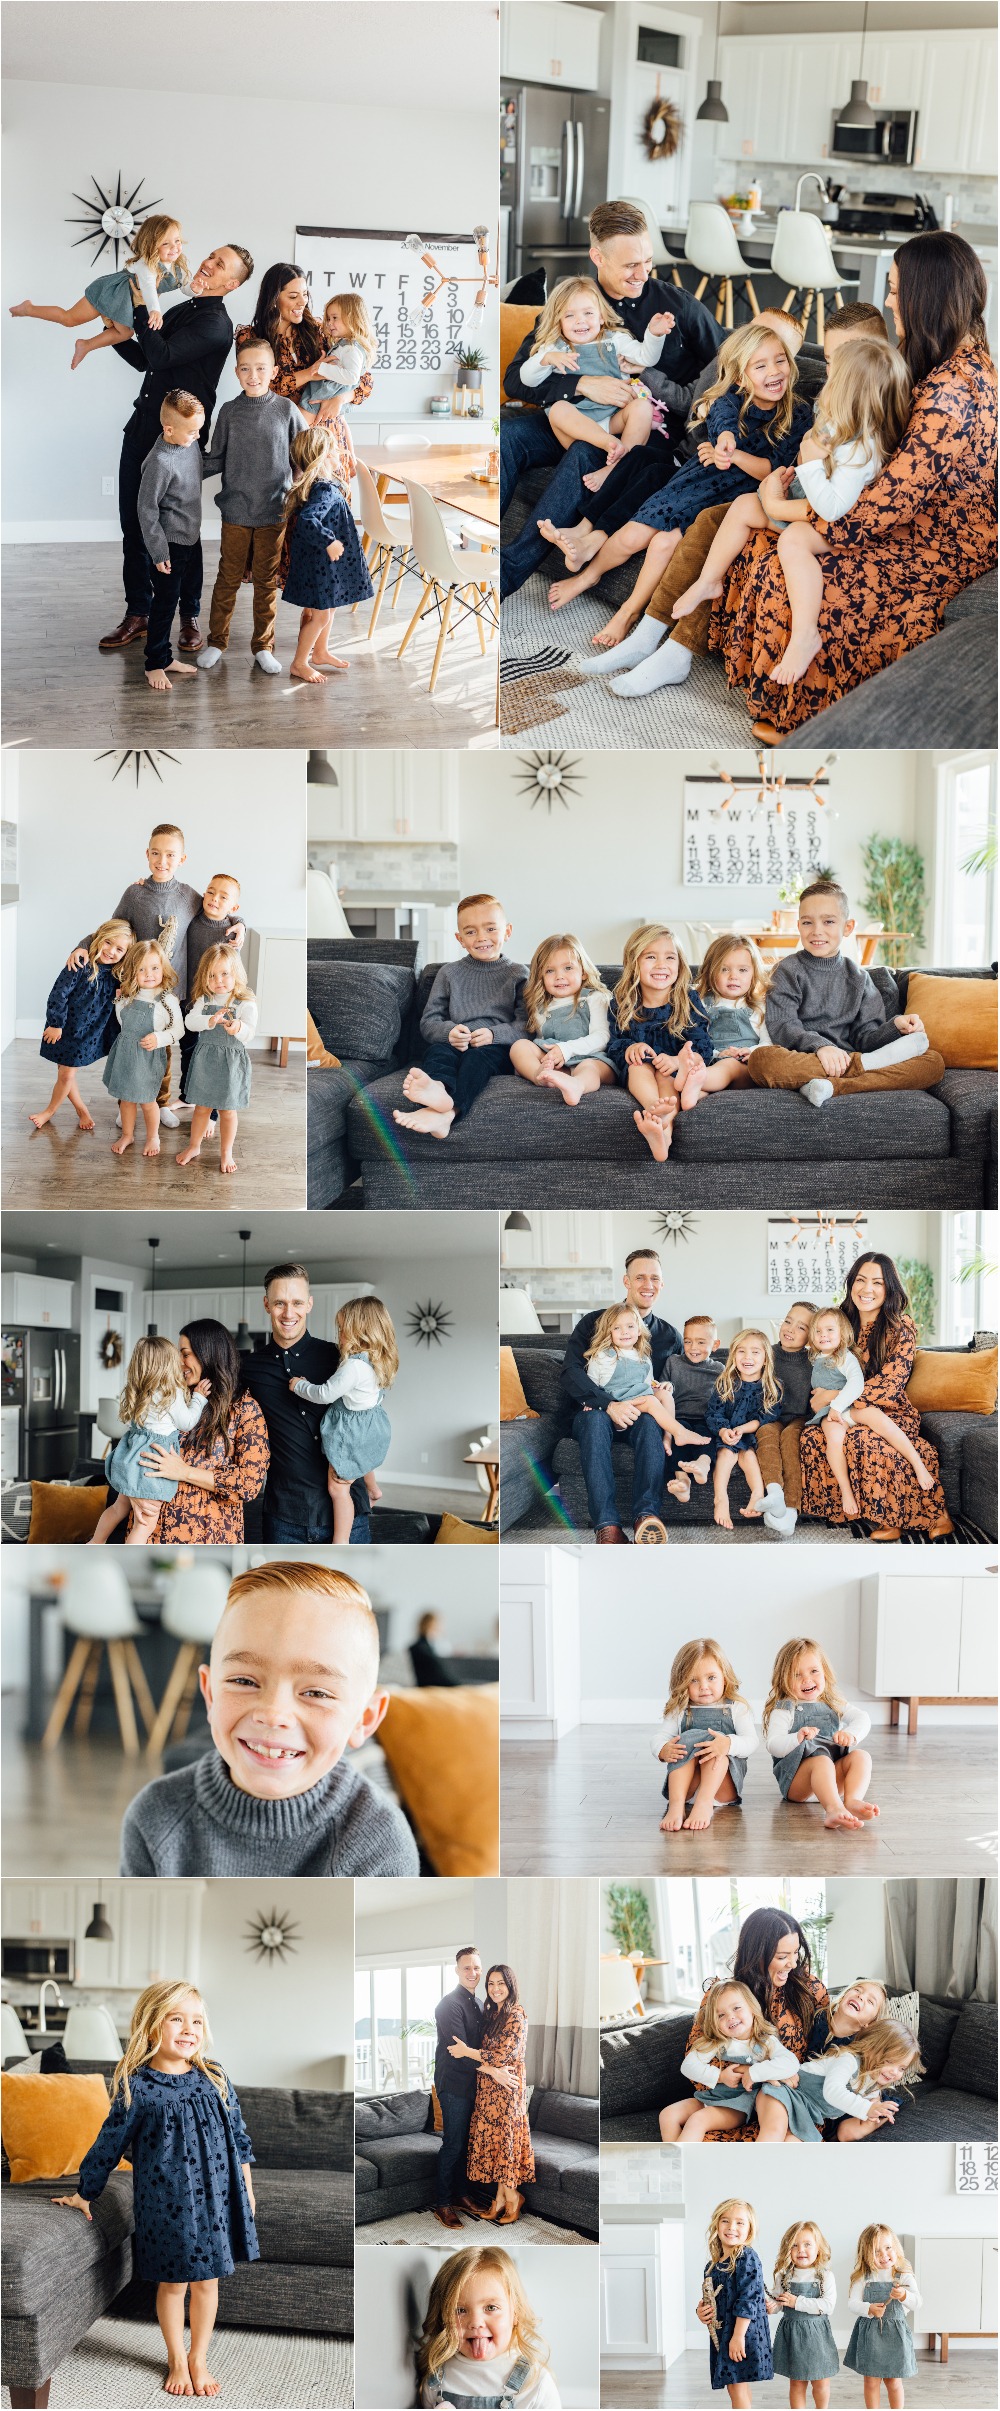 Utah County In-Home Family Photographer